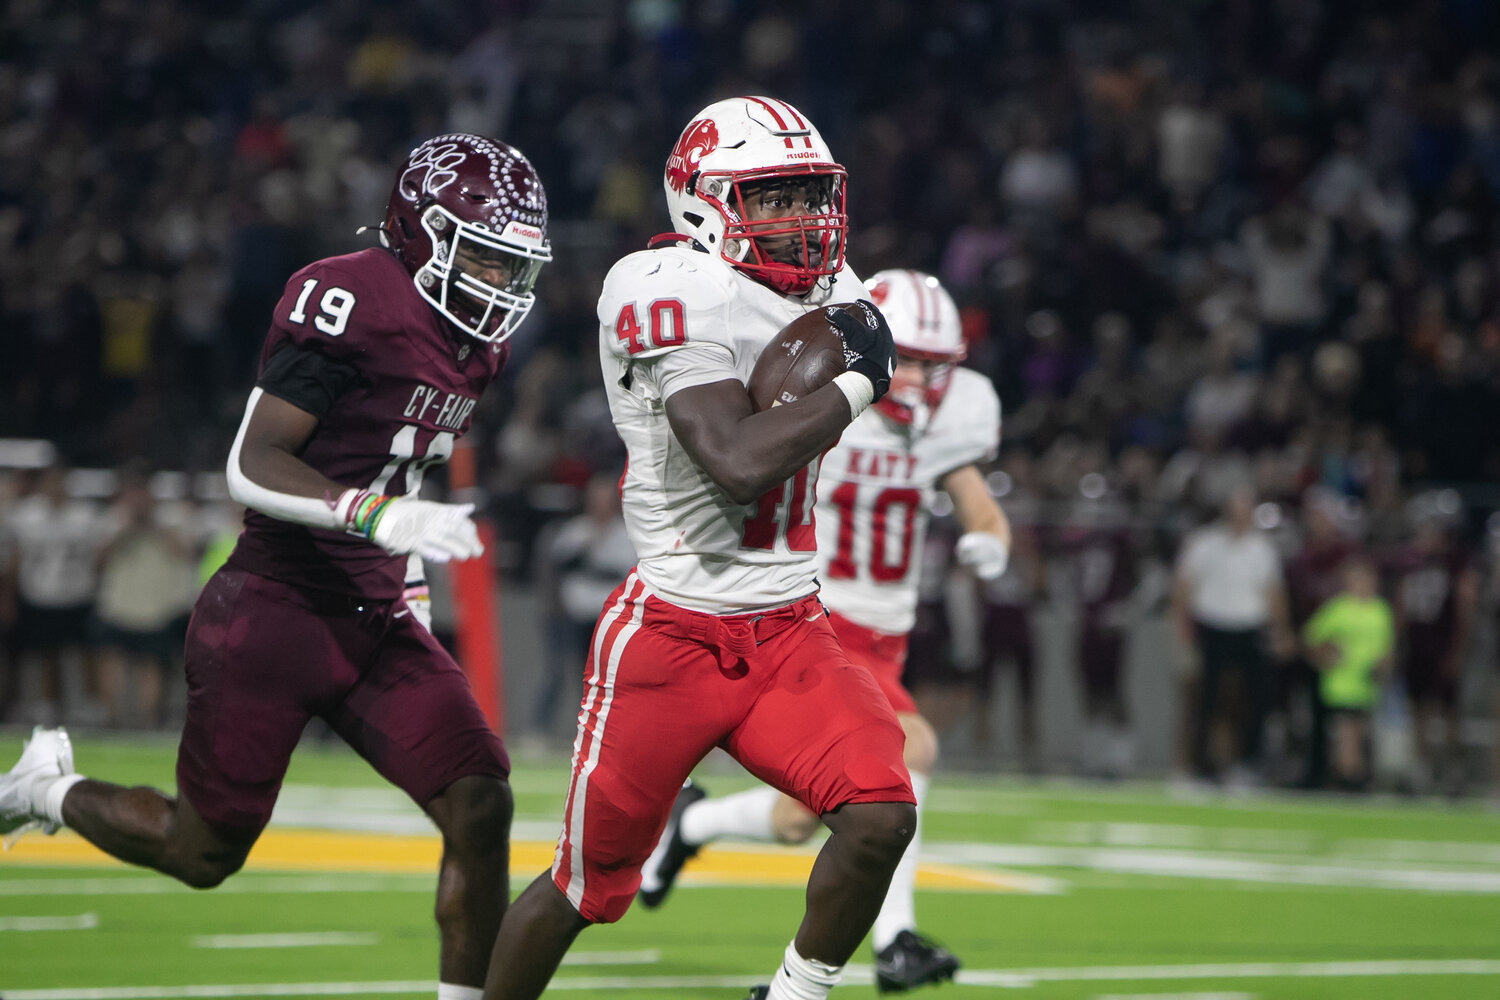 Tremayne Hill runs downfield during Friday's area round game between Katy and Cy-Fair at the Berry Center in Cypress.